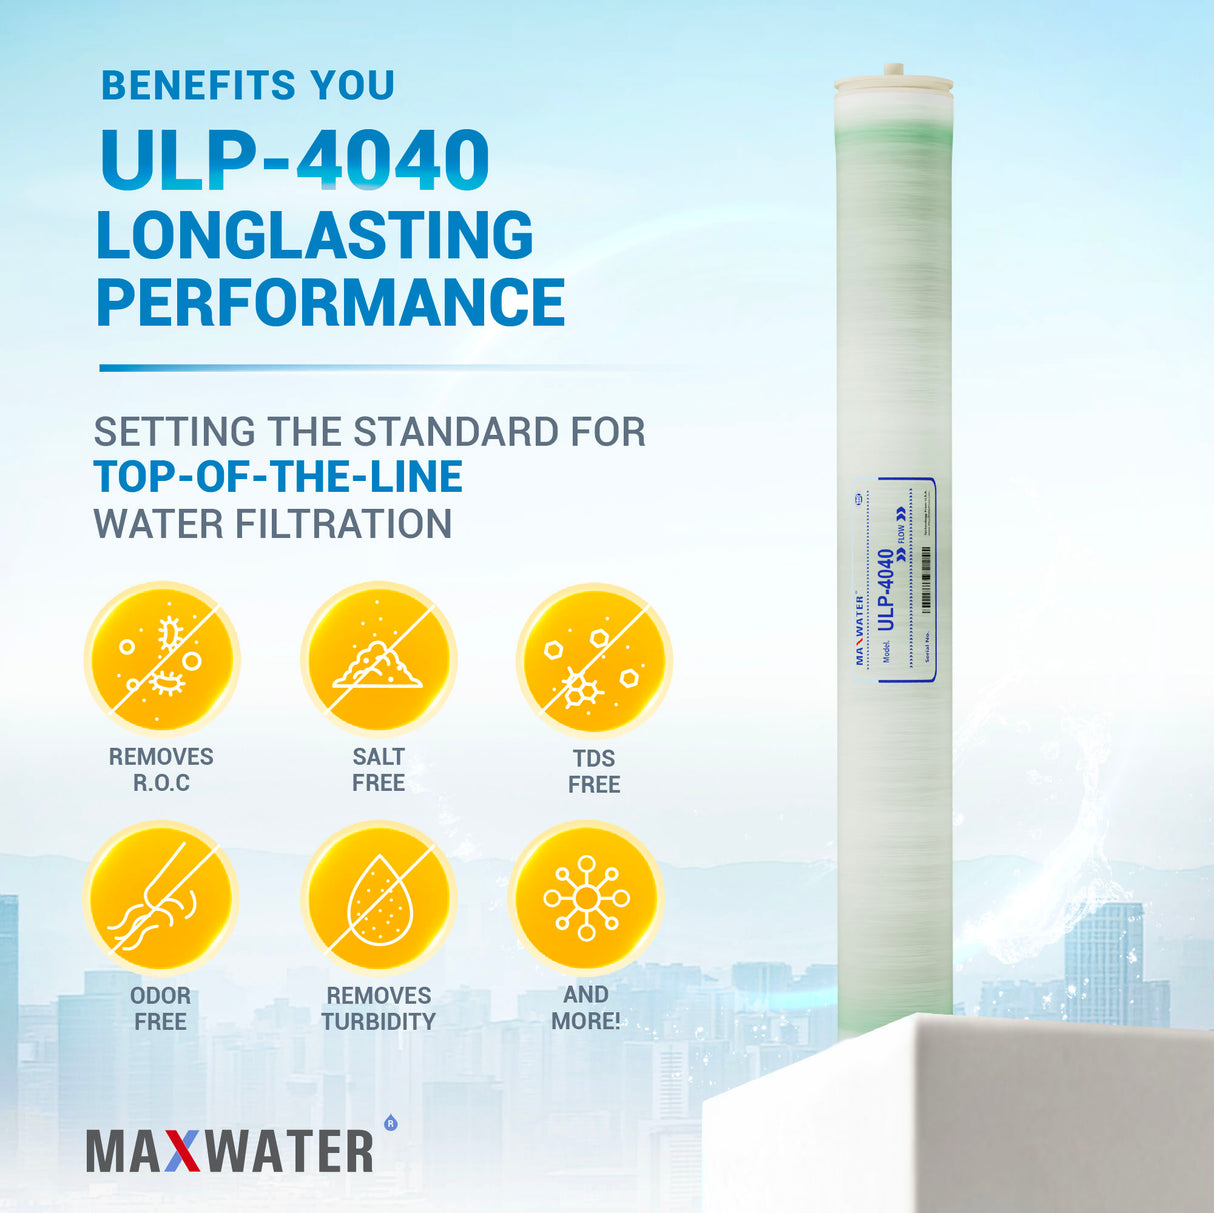 Enhance water purity in ultra low-pressure systems with this 4x40-inch ULP RO membrane.